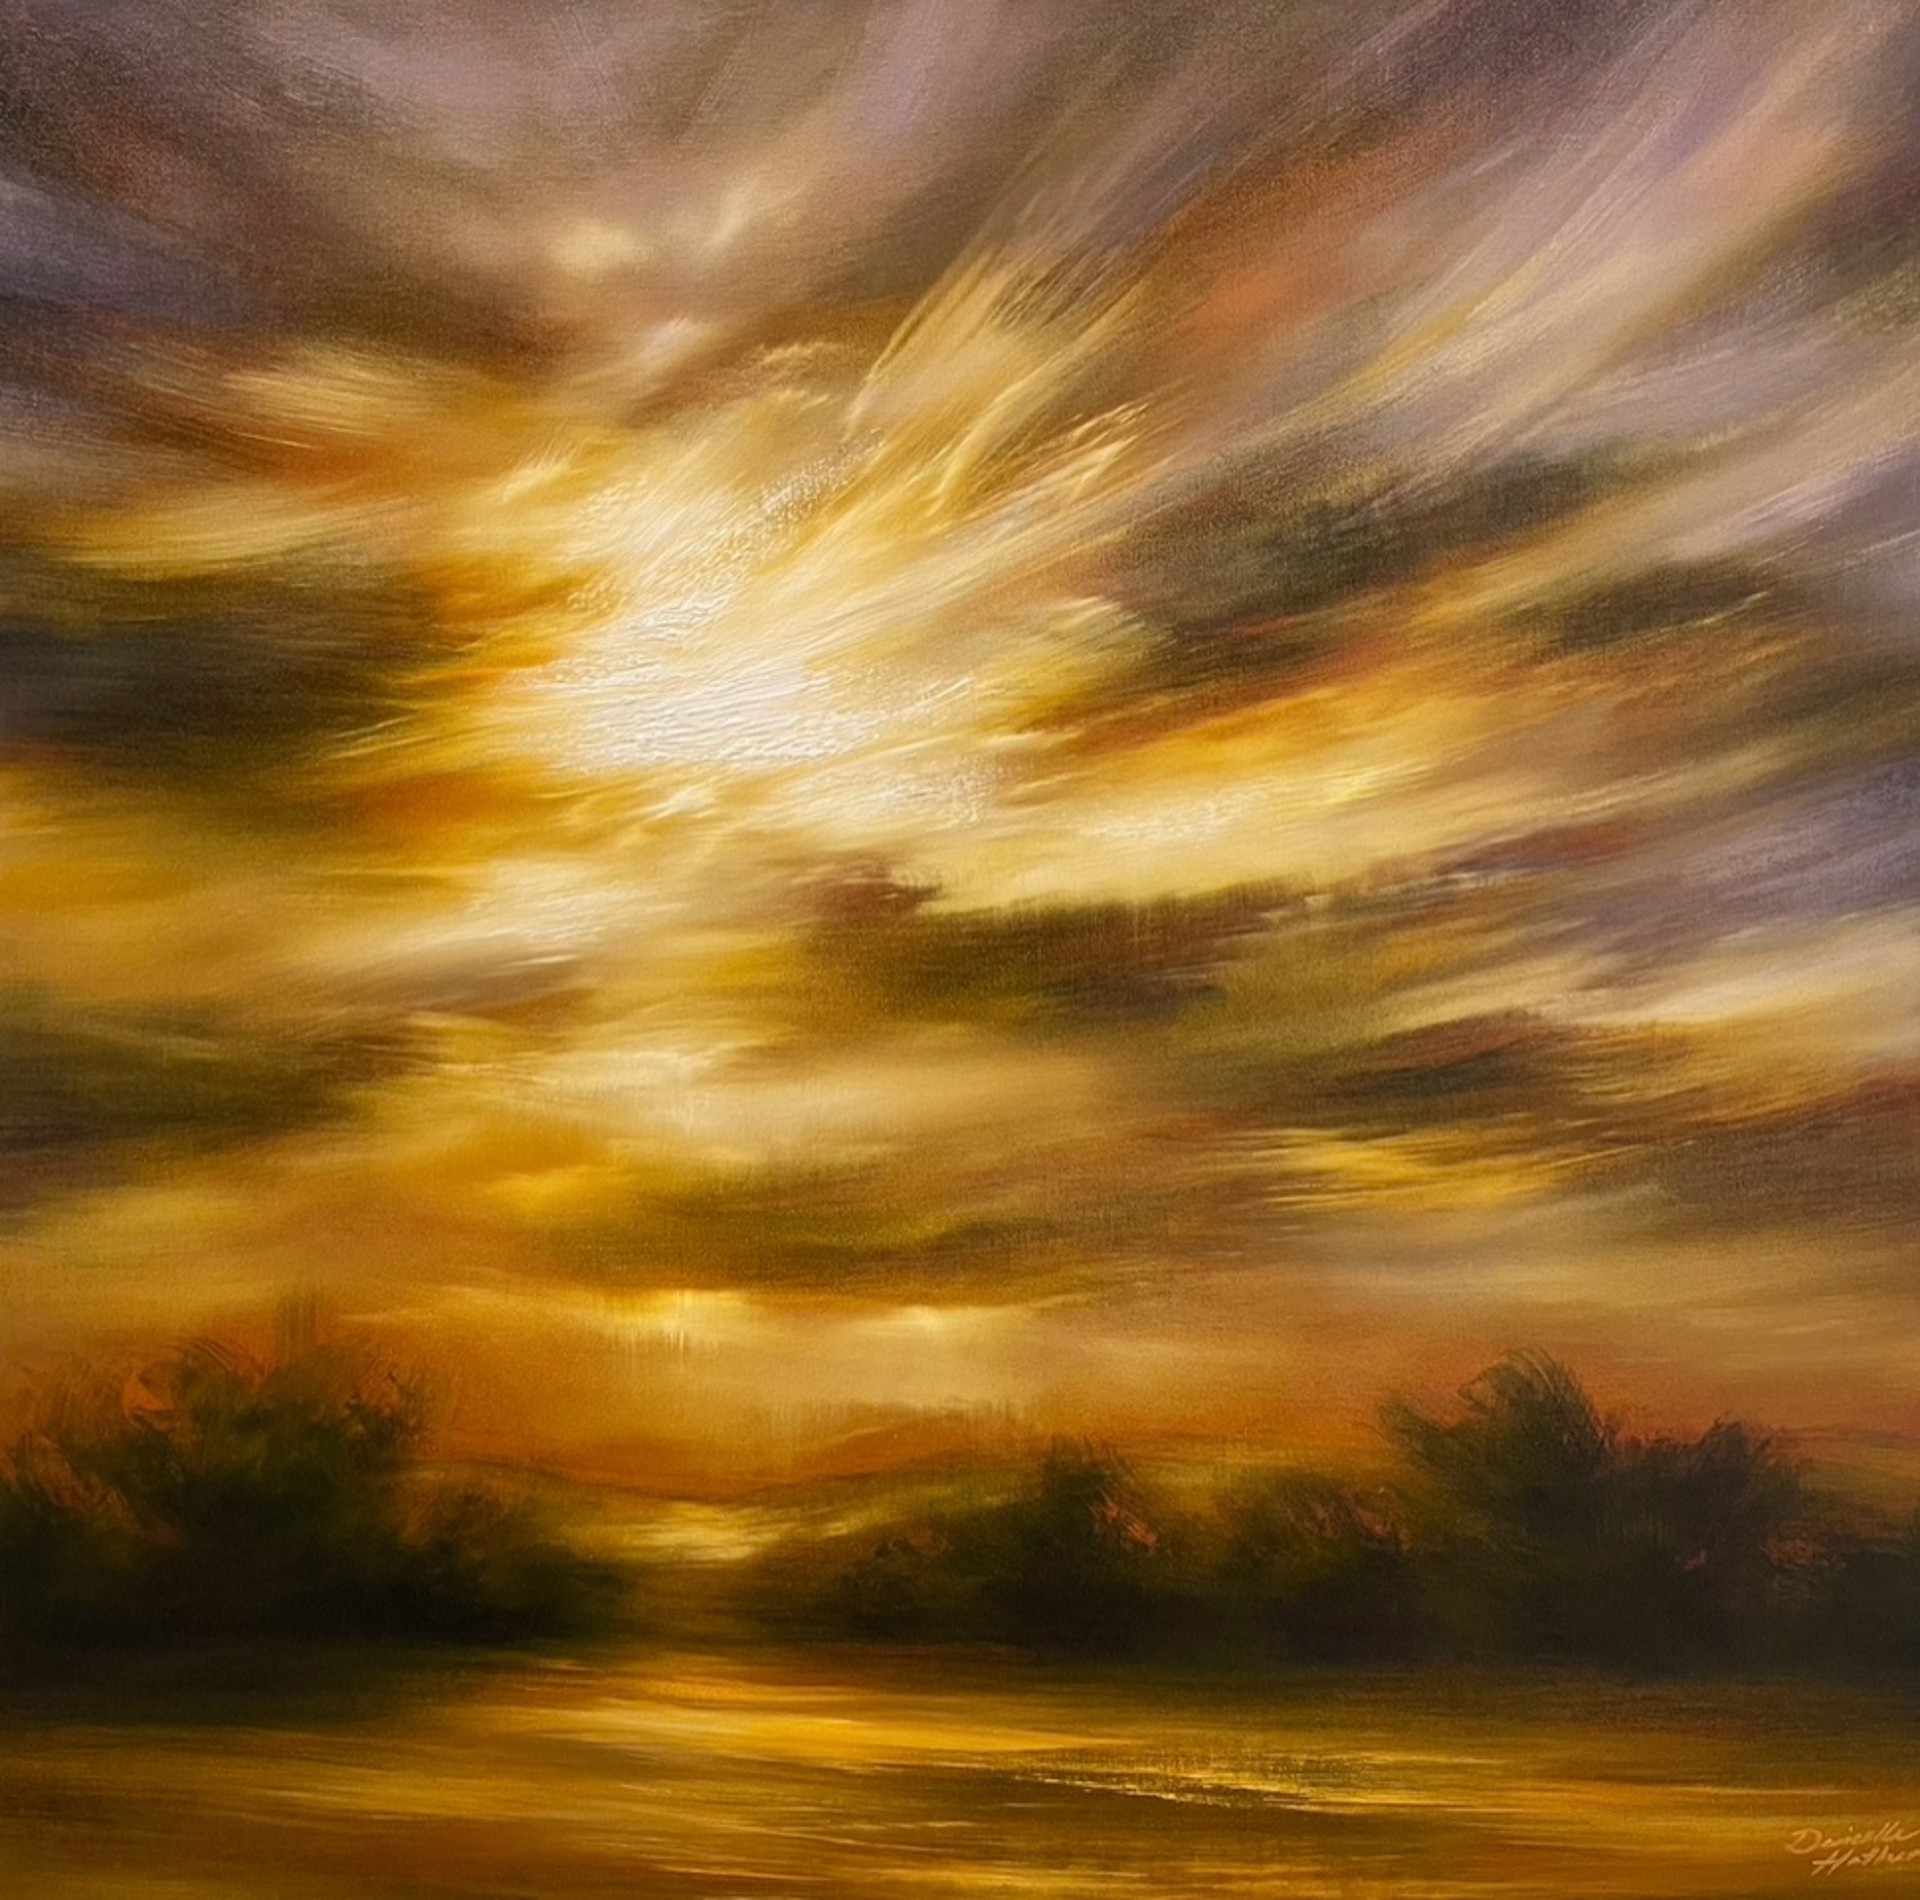 Golden Afternoon by Danielle HATHERLEY